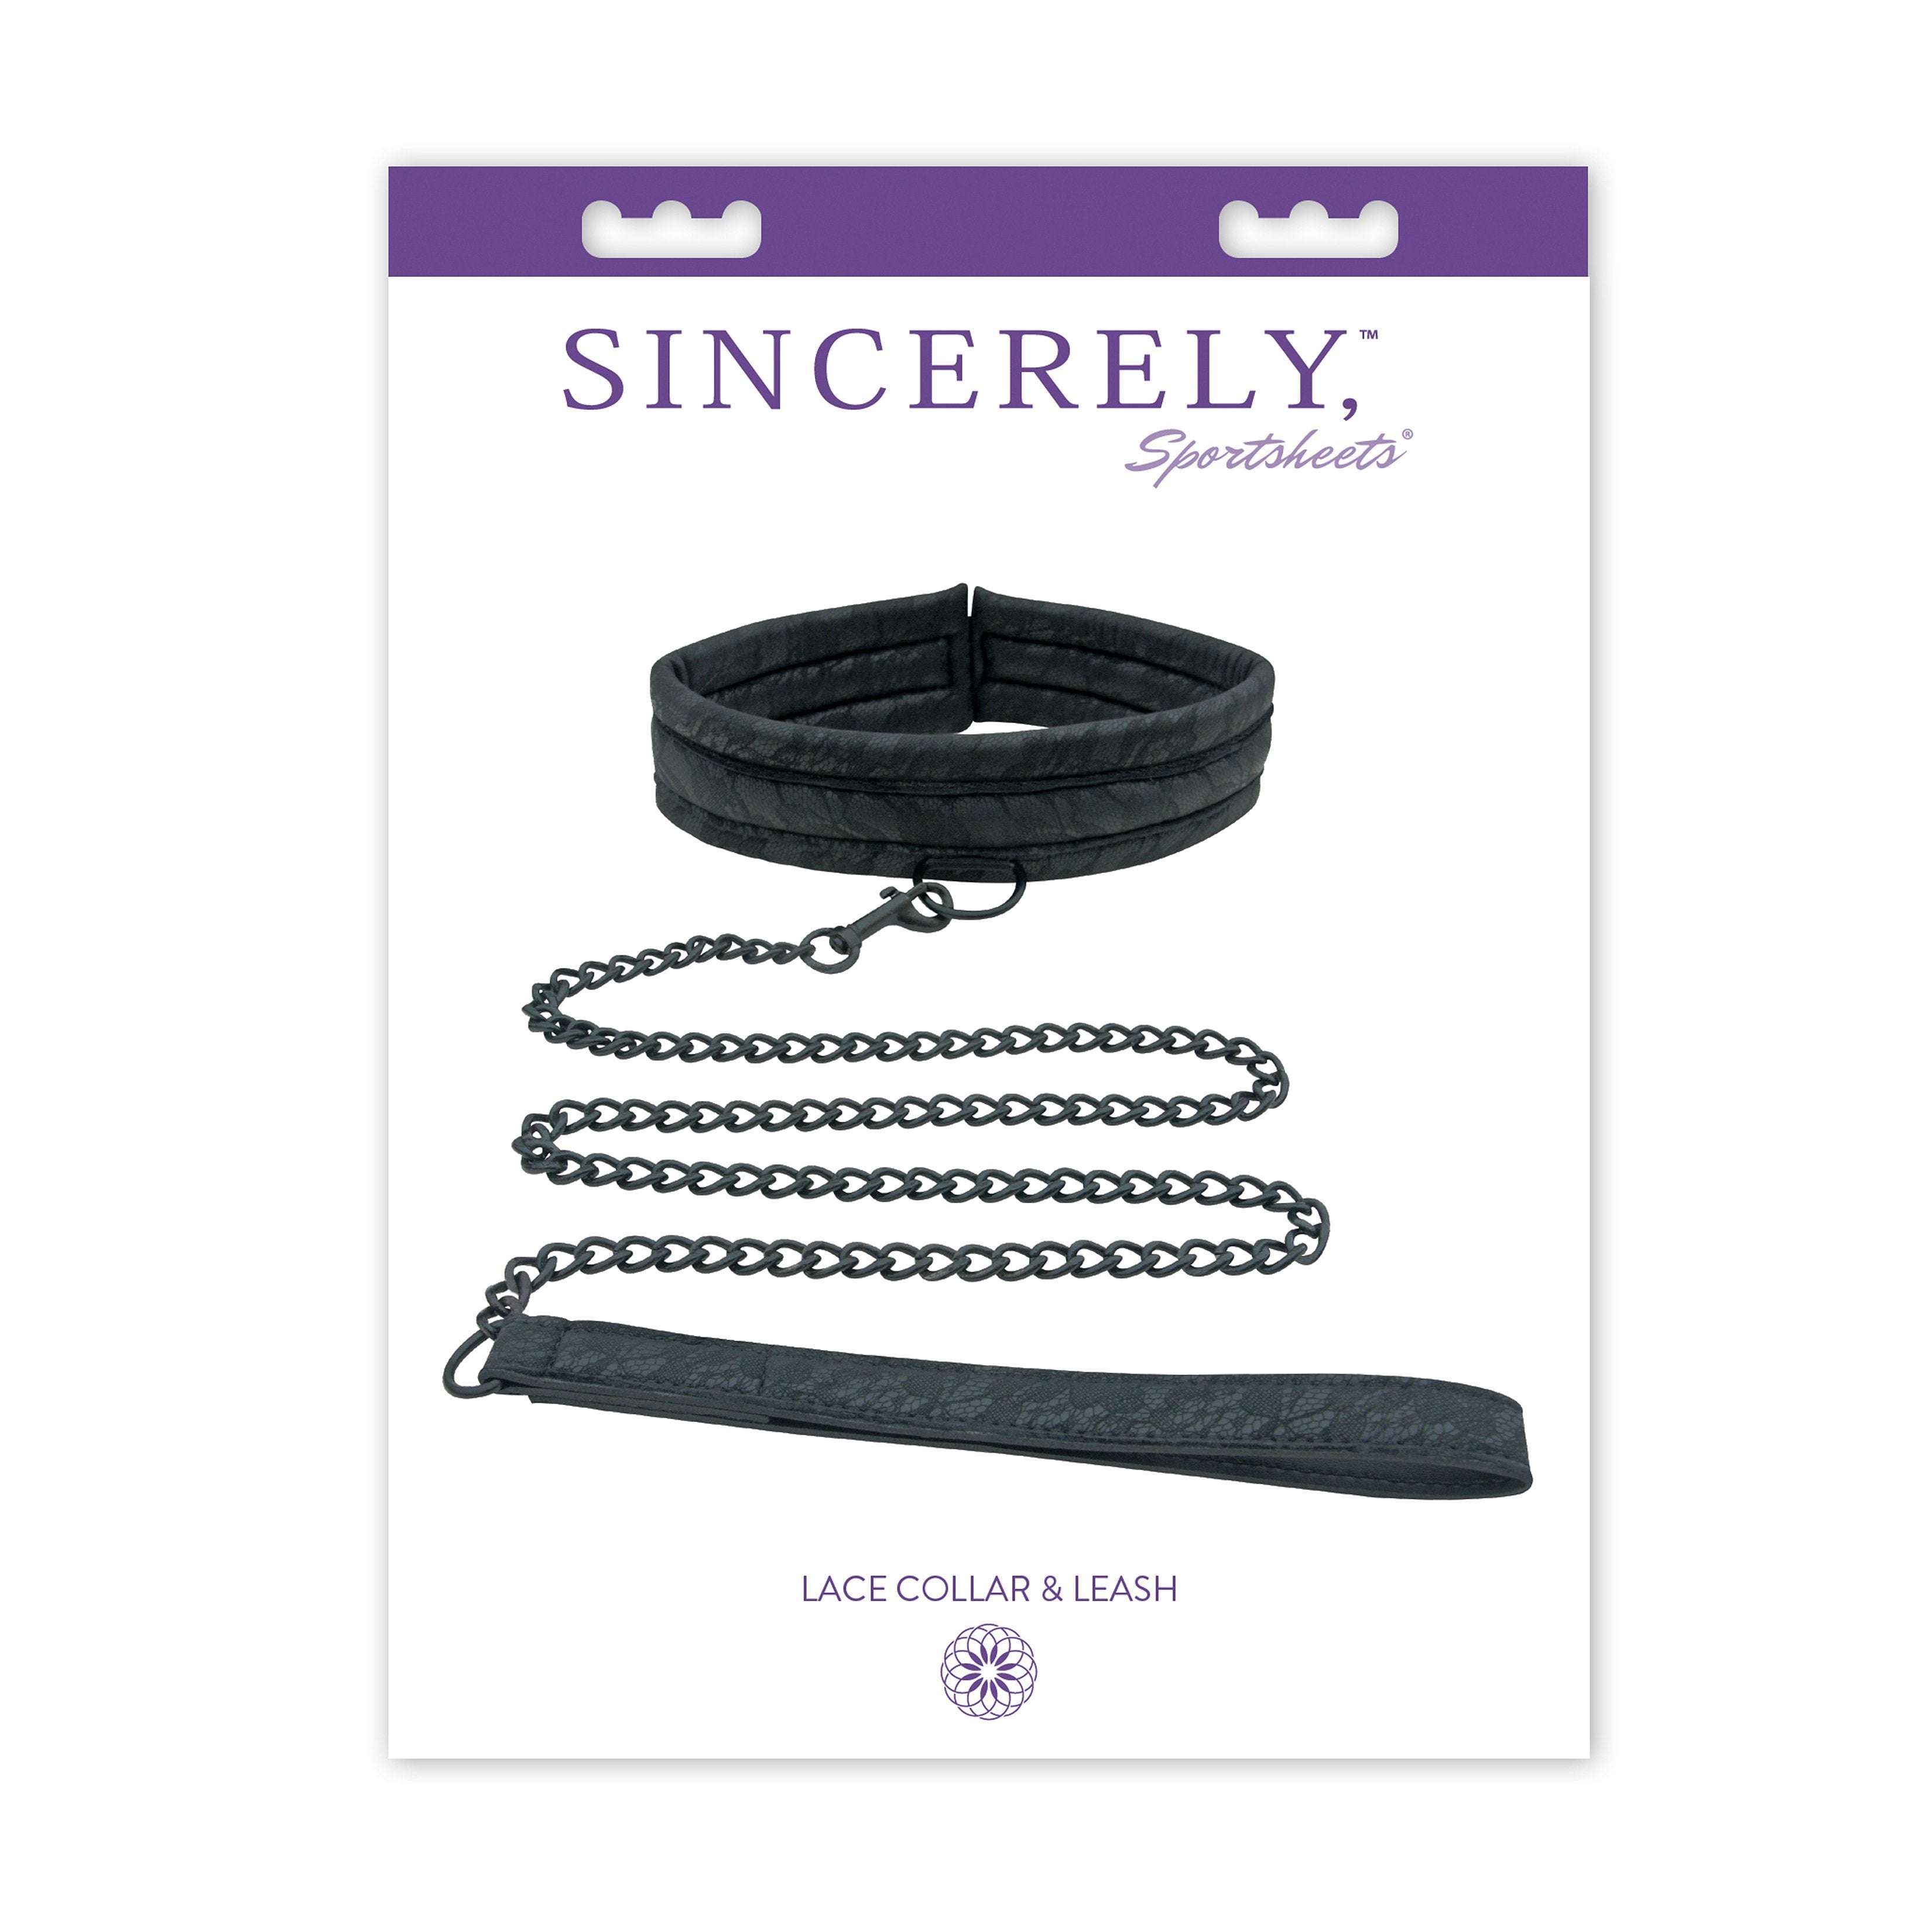 Sincerely by Sportsheets Lace Collar & Leash - Black - Thorn & Feather